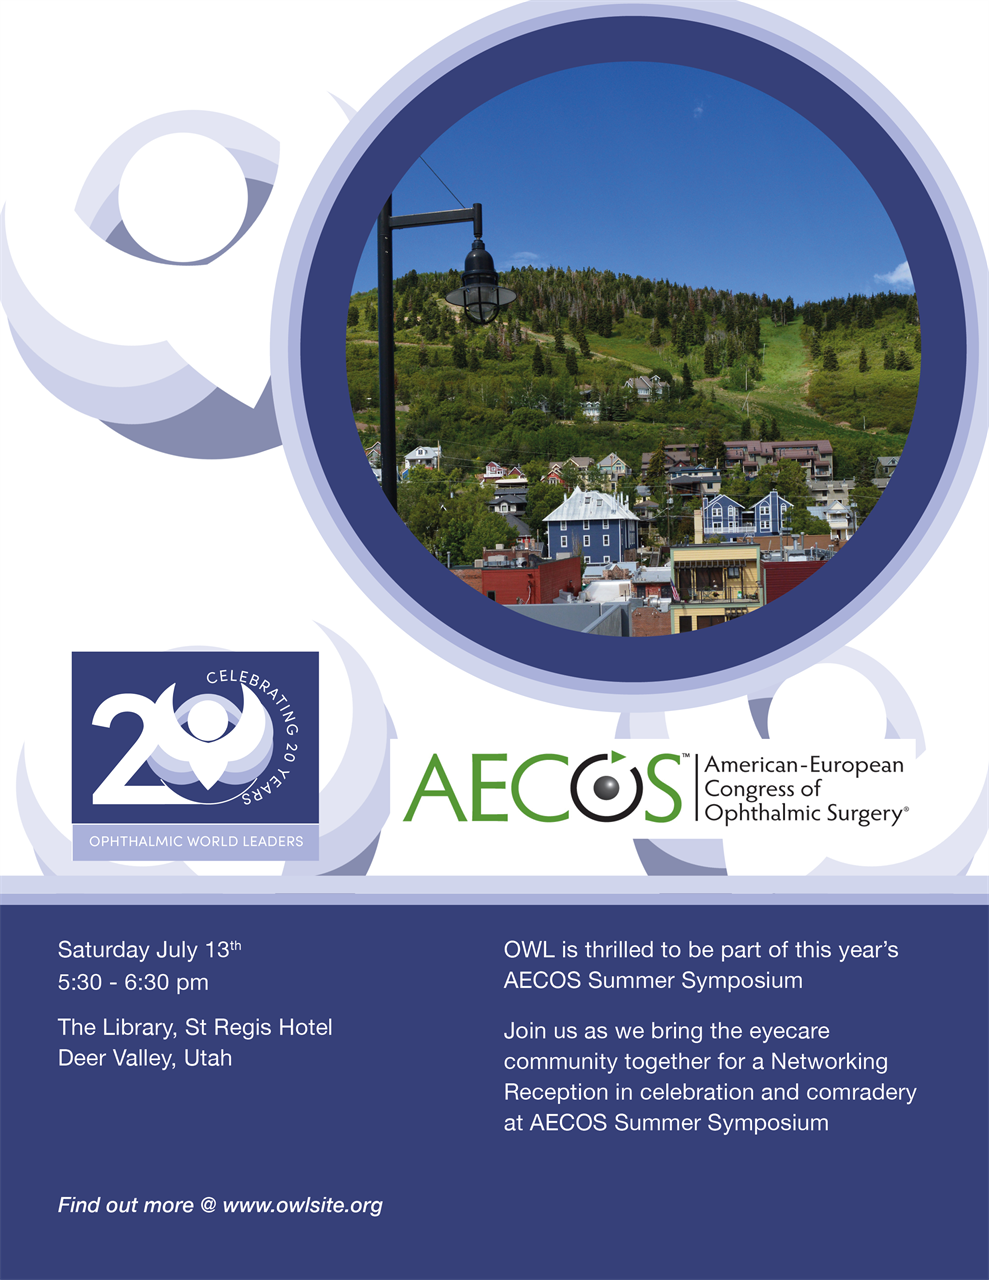 Join us as we bring the eyecare community together for a Networking Reception in celebration and comradery at AECOS Summer Symposium on Sat, July 13th, 2024; 5:30 PM - 6:30 PM MDT | OWL is thrilled to be part of this year's AECOS Summer Symposium! (Location: The Library, St Regis Hotel, Deer Valley, Utah).